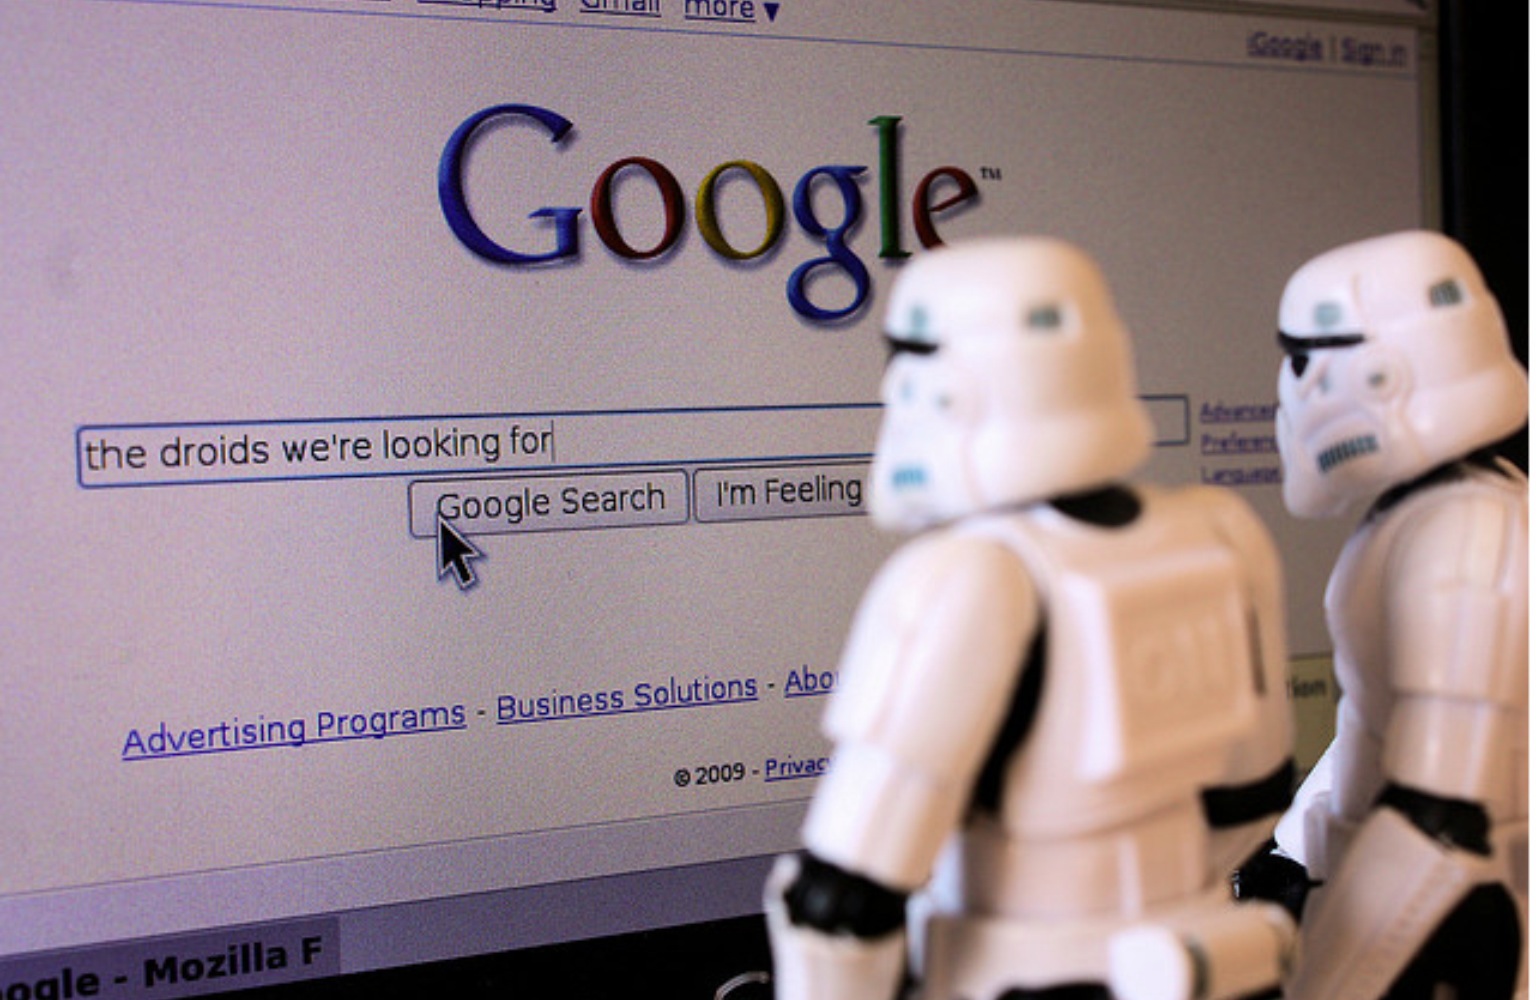 star-wars-humour-the-droids-were-looking-for-stormtroopers-use-google-search.jpg